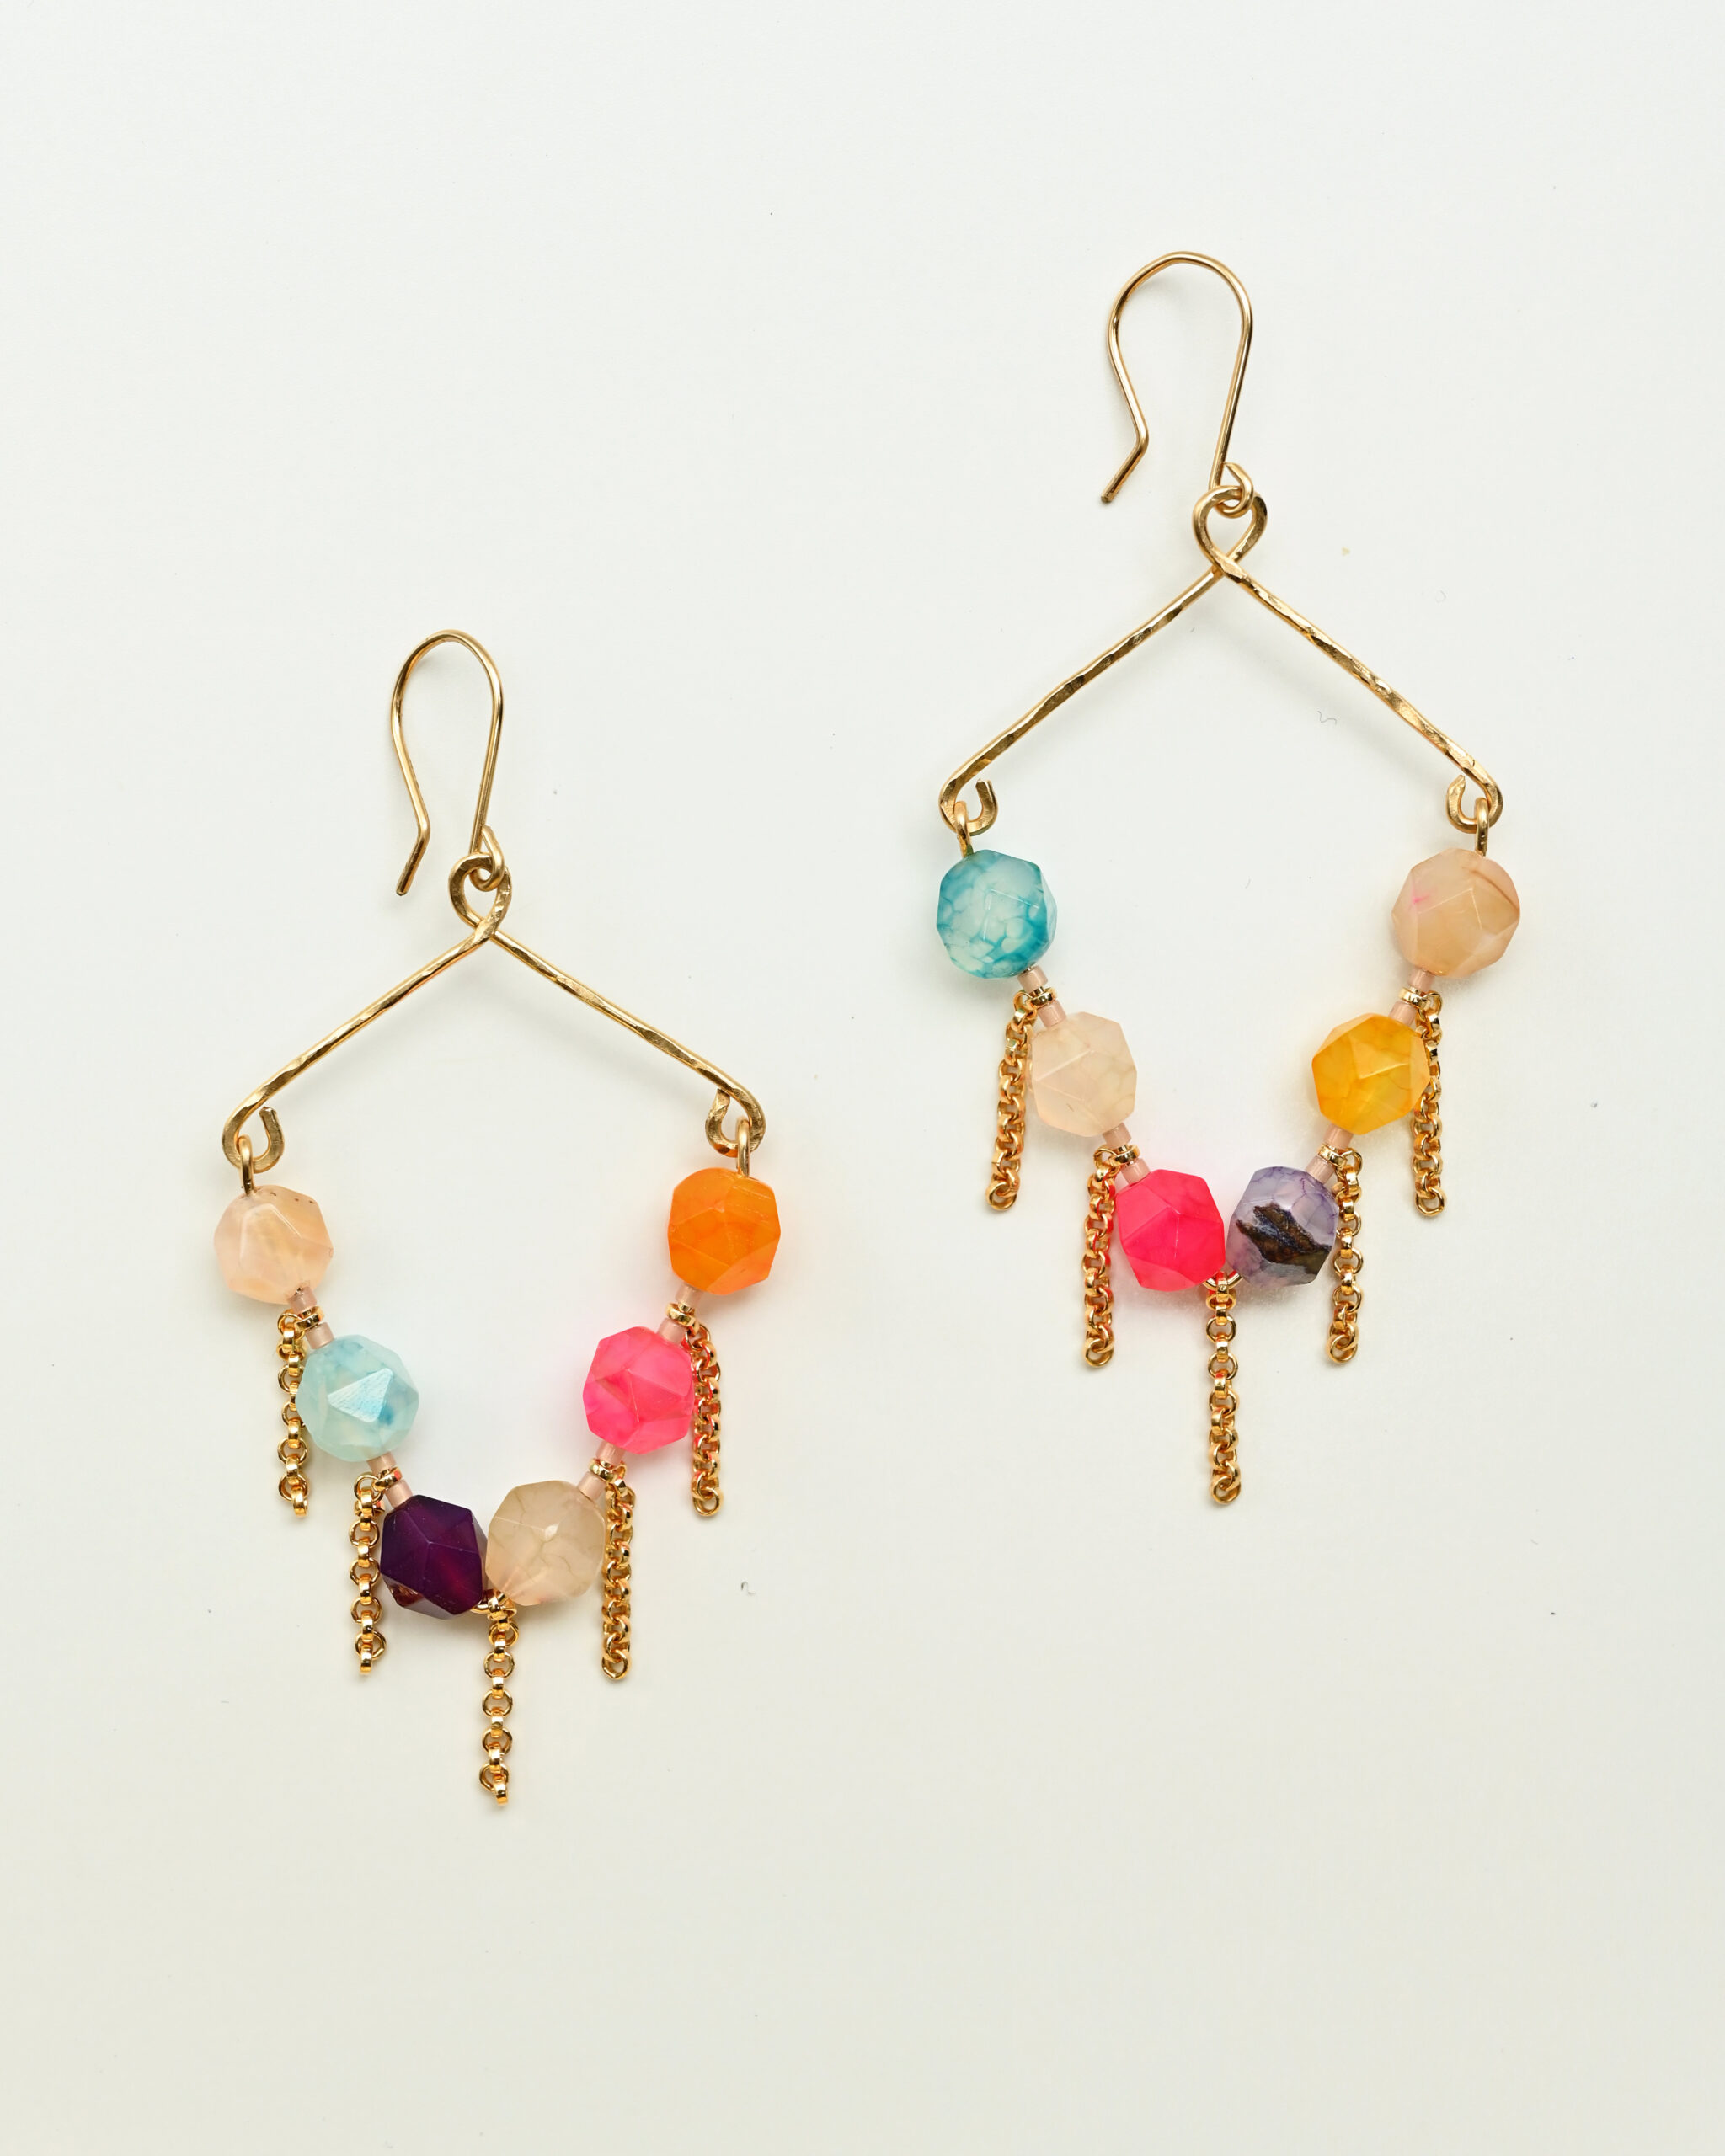 14k gold filled drop earrings with agate gemstones and chains